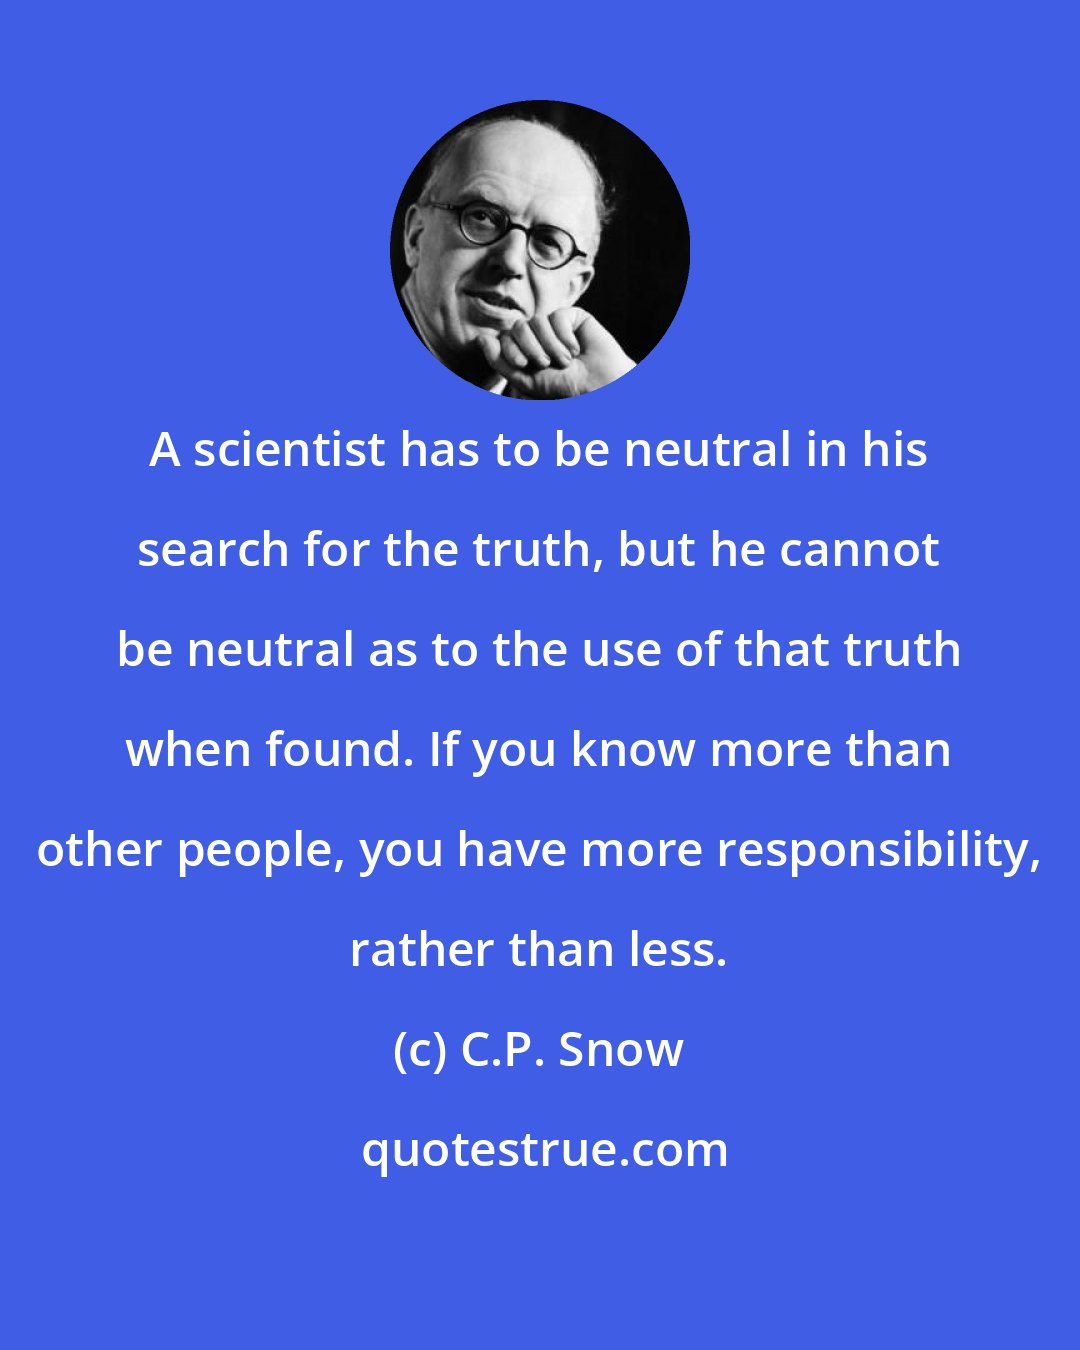 C.P. Snow: A scientist has to be neutral in his search for the truth, but he cannot be neutral as to the use of that truth when found. If you know more than other people, you have more responsibility, rather than less.